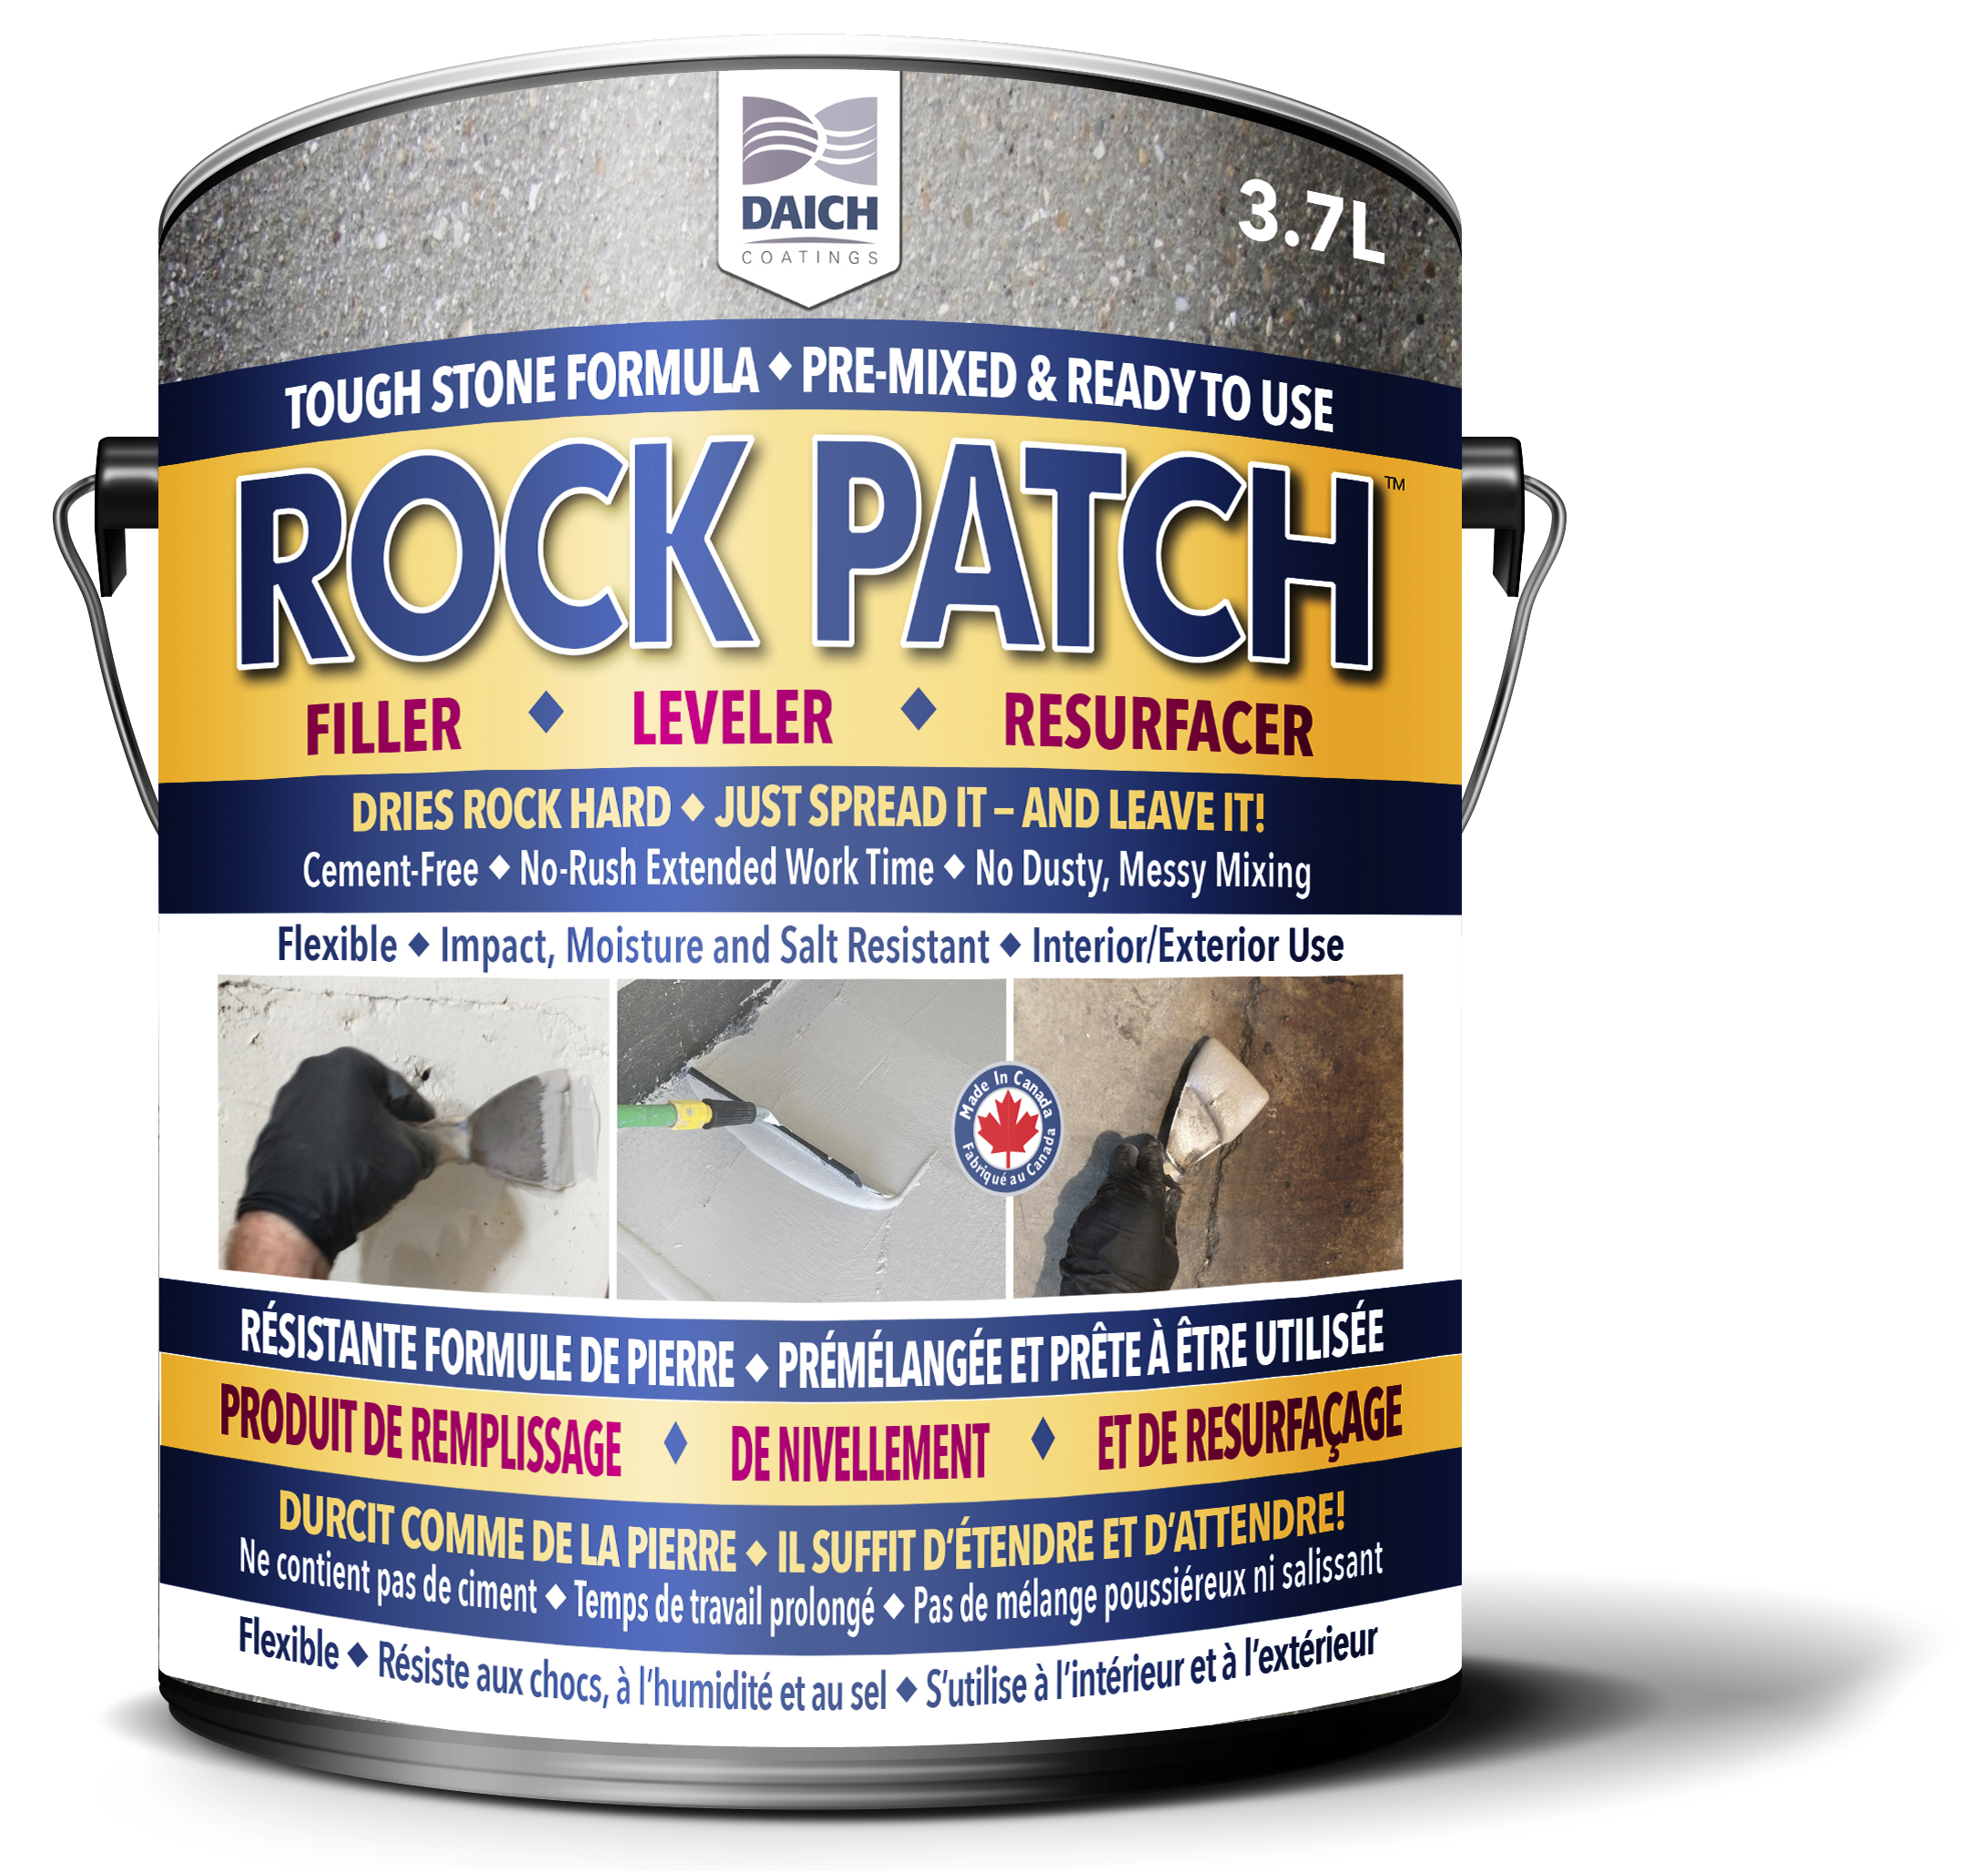 Rock Patch Filler, Leveler and Resurfacer - Daich Coatings